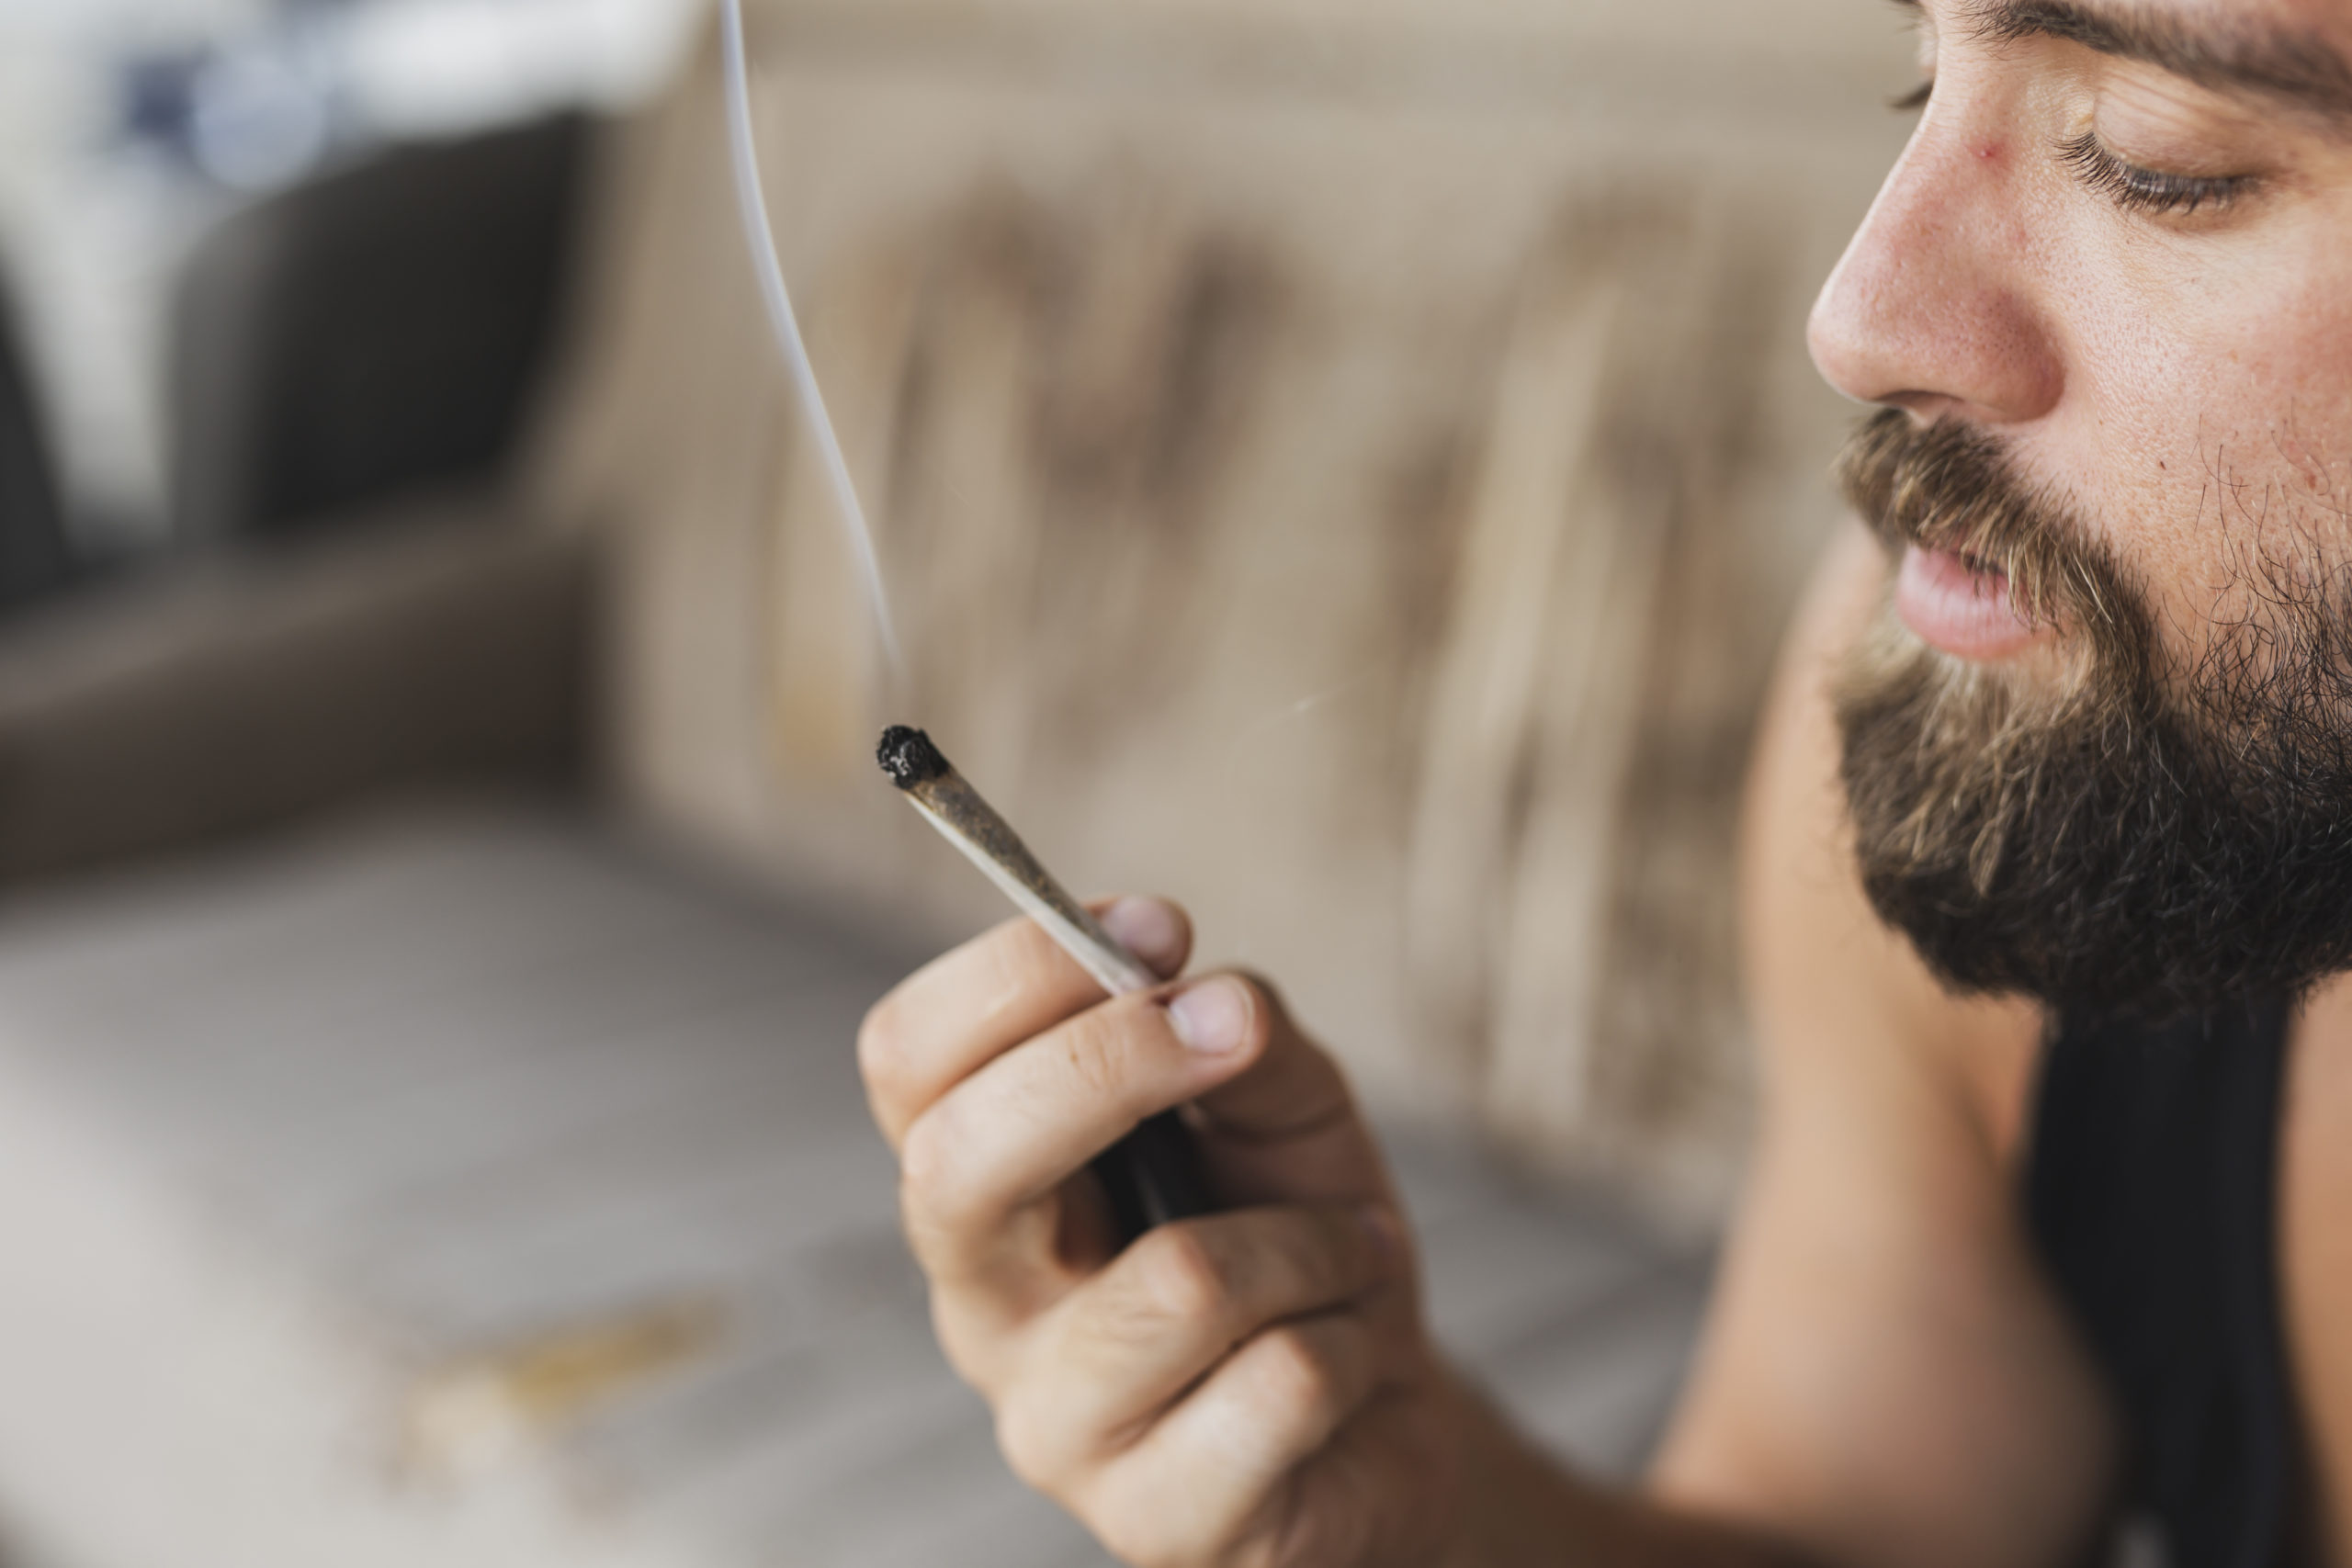 Marijuana Users May Be More At Risk For Contracting COVID-19